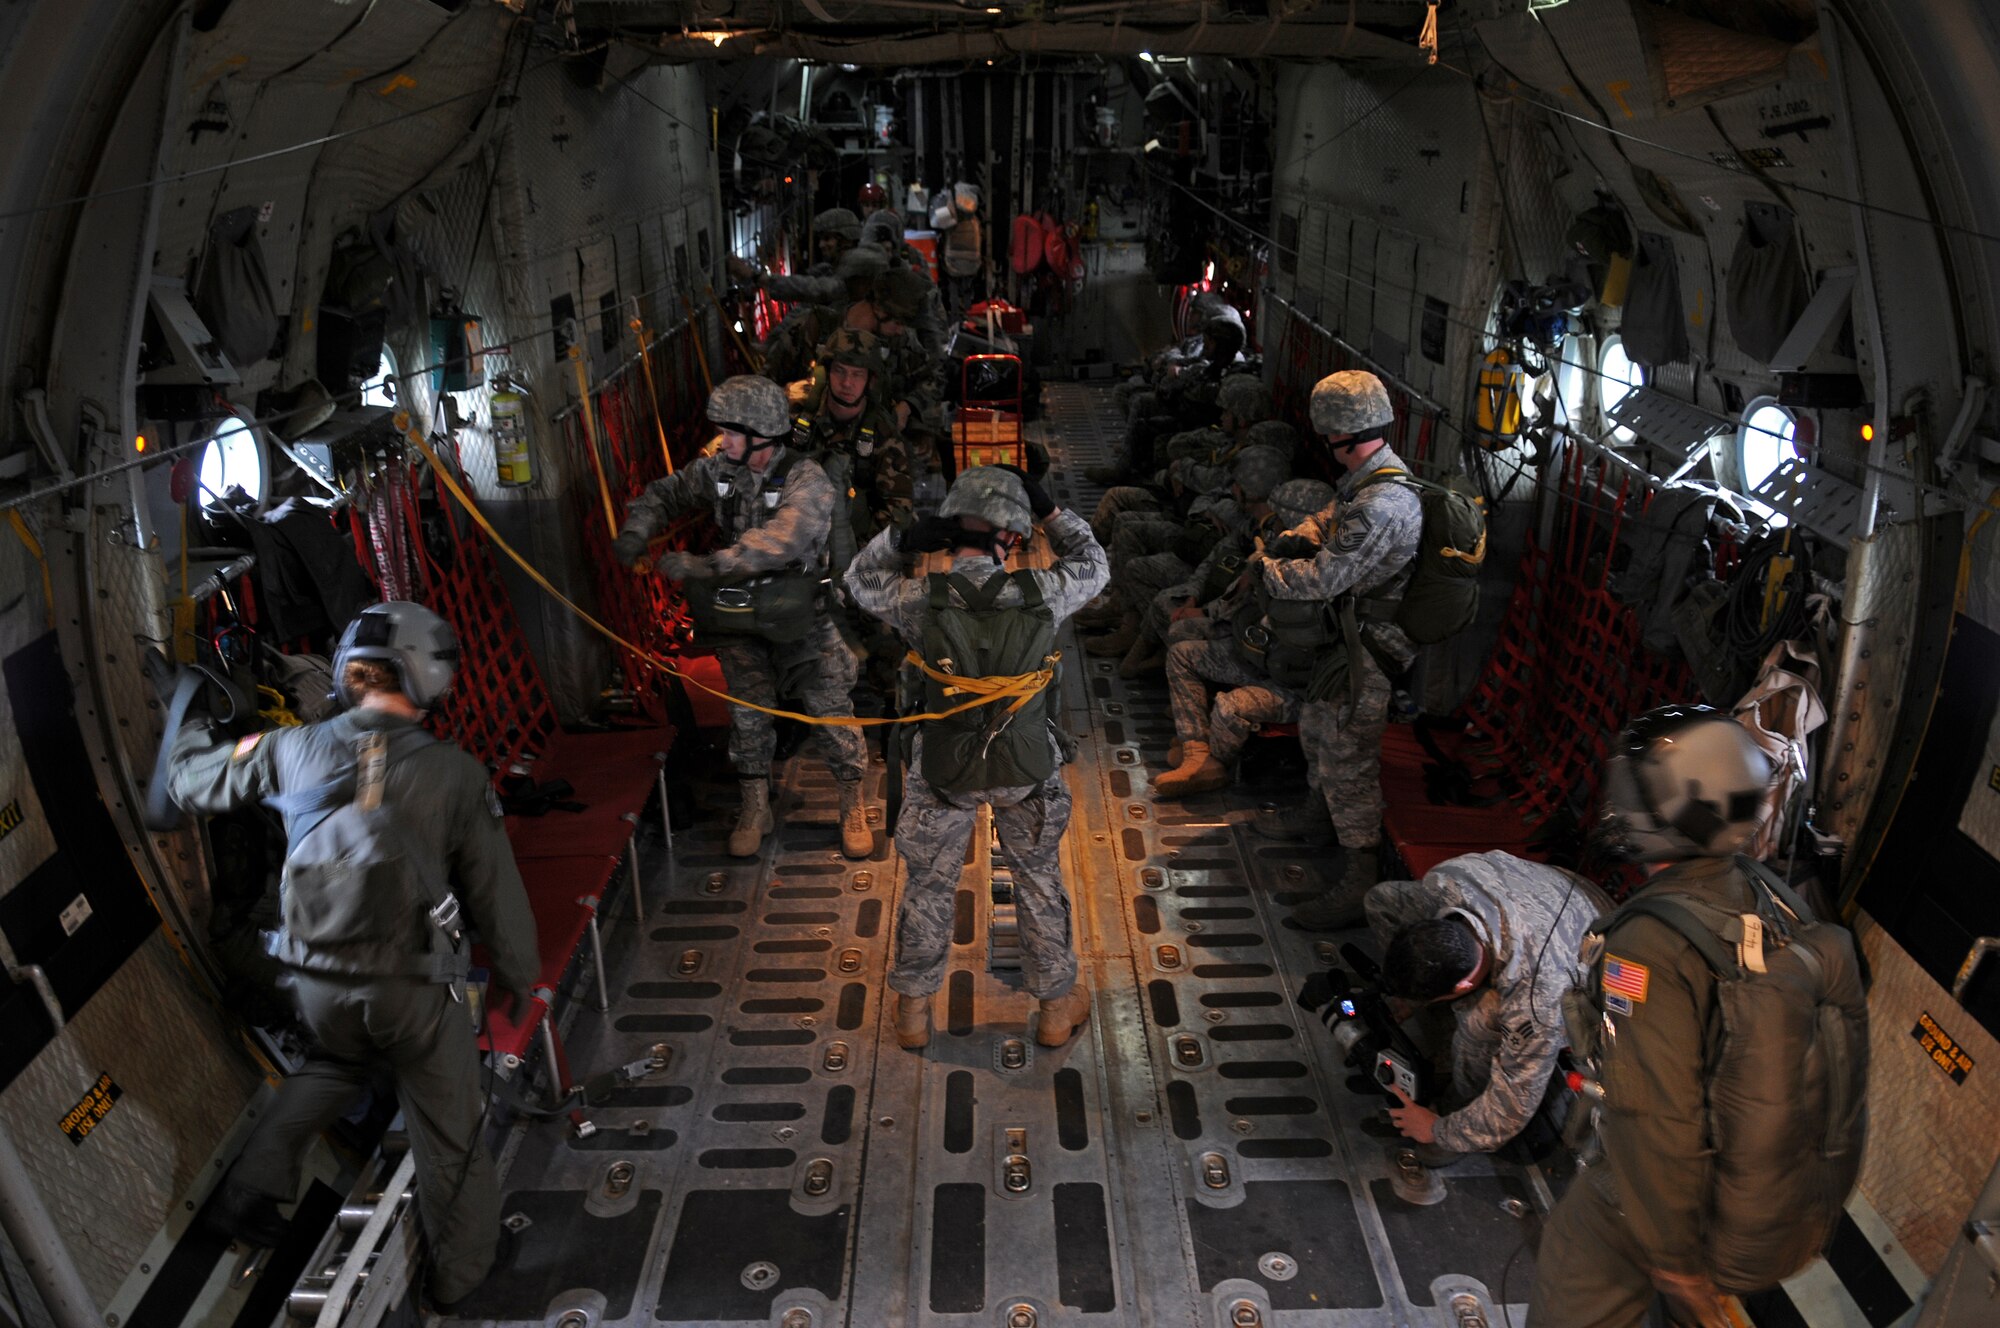 United States Air Force paratroopers prepare to execute a jump out the back of a C-130E Hercules over southern Germany, April 30, 2009. The jump was conducted as part of the celebration for the Contingency Readiness Group's 10th anniversary. (U.S. Air Force photo by Airman 1st Class Grovert Fuentes-Contreras)